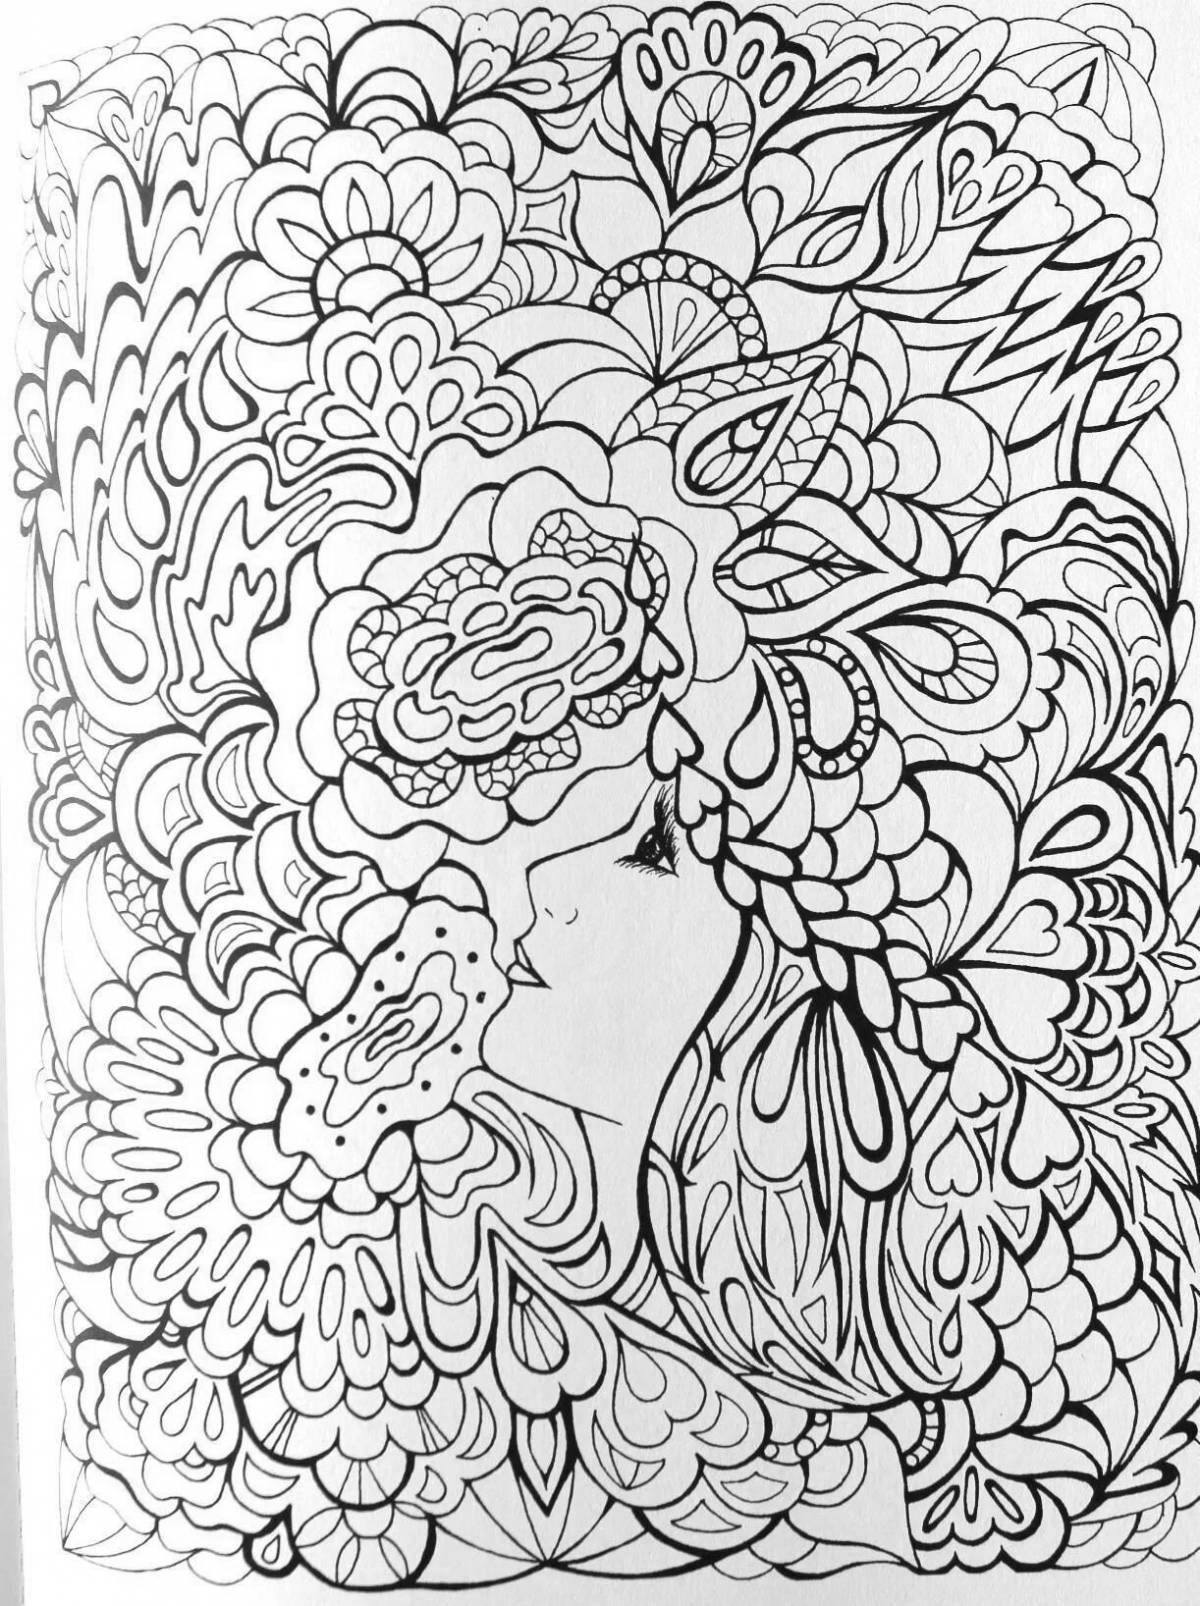 Exquisite coloring pages for adults